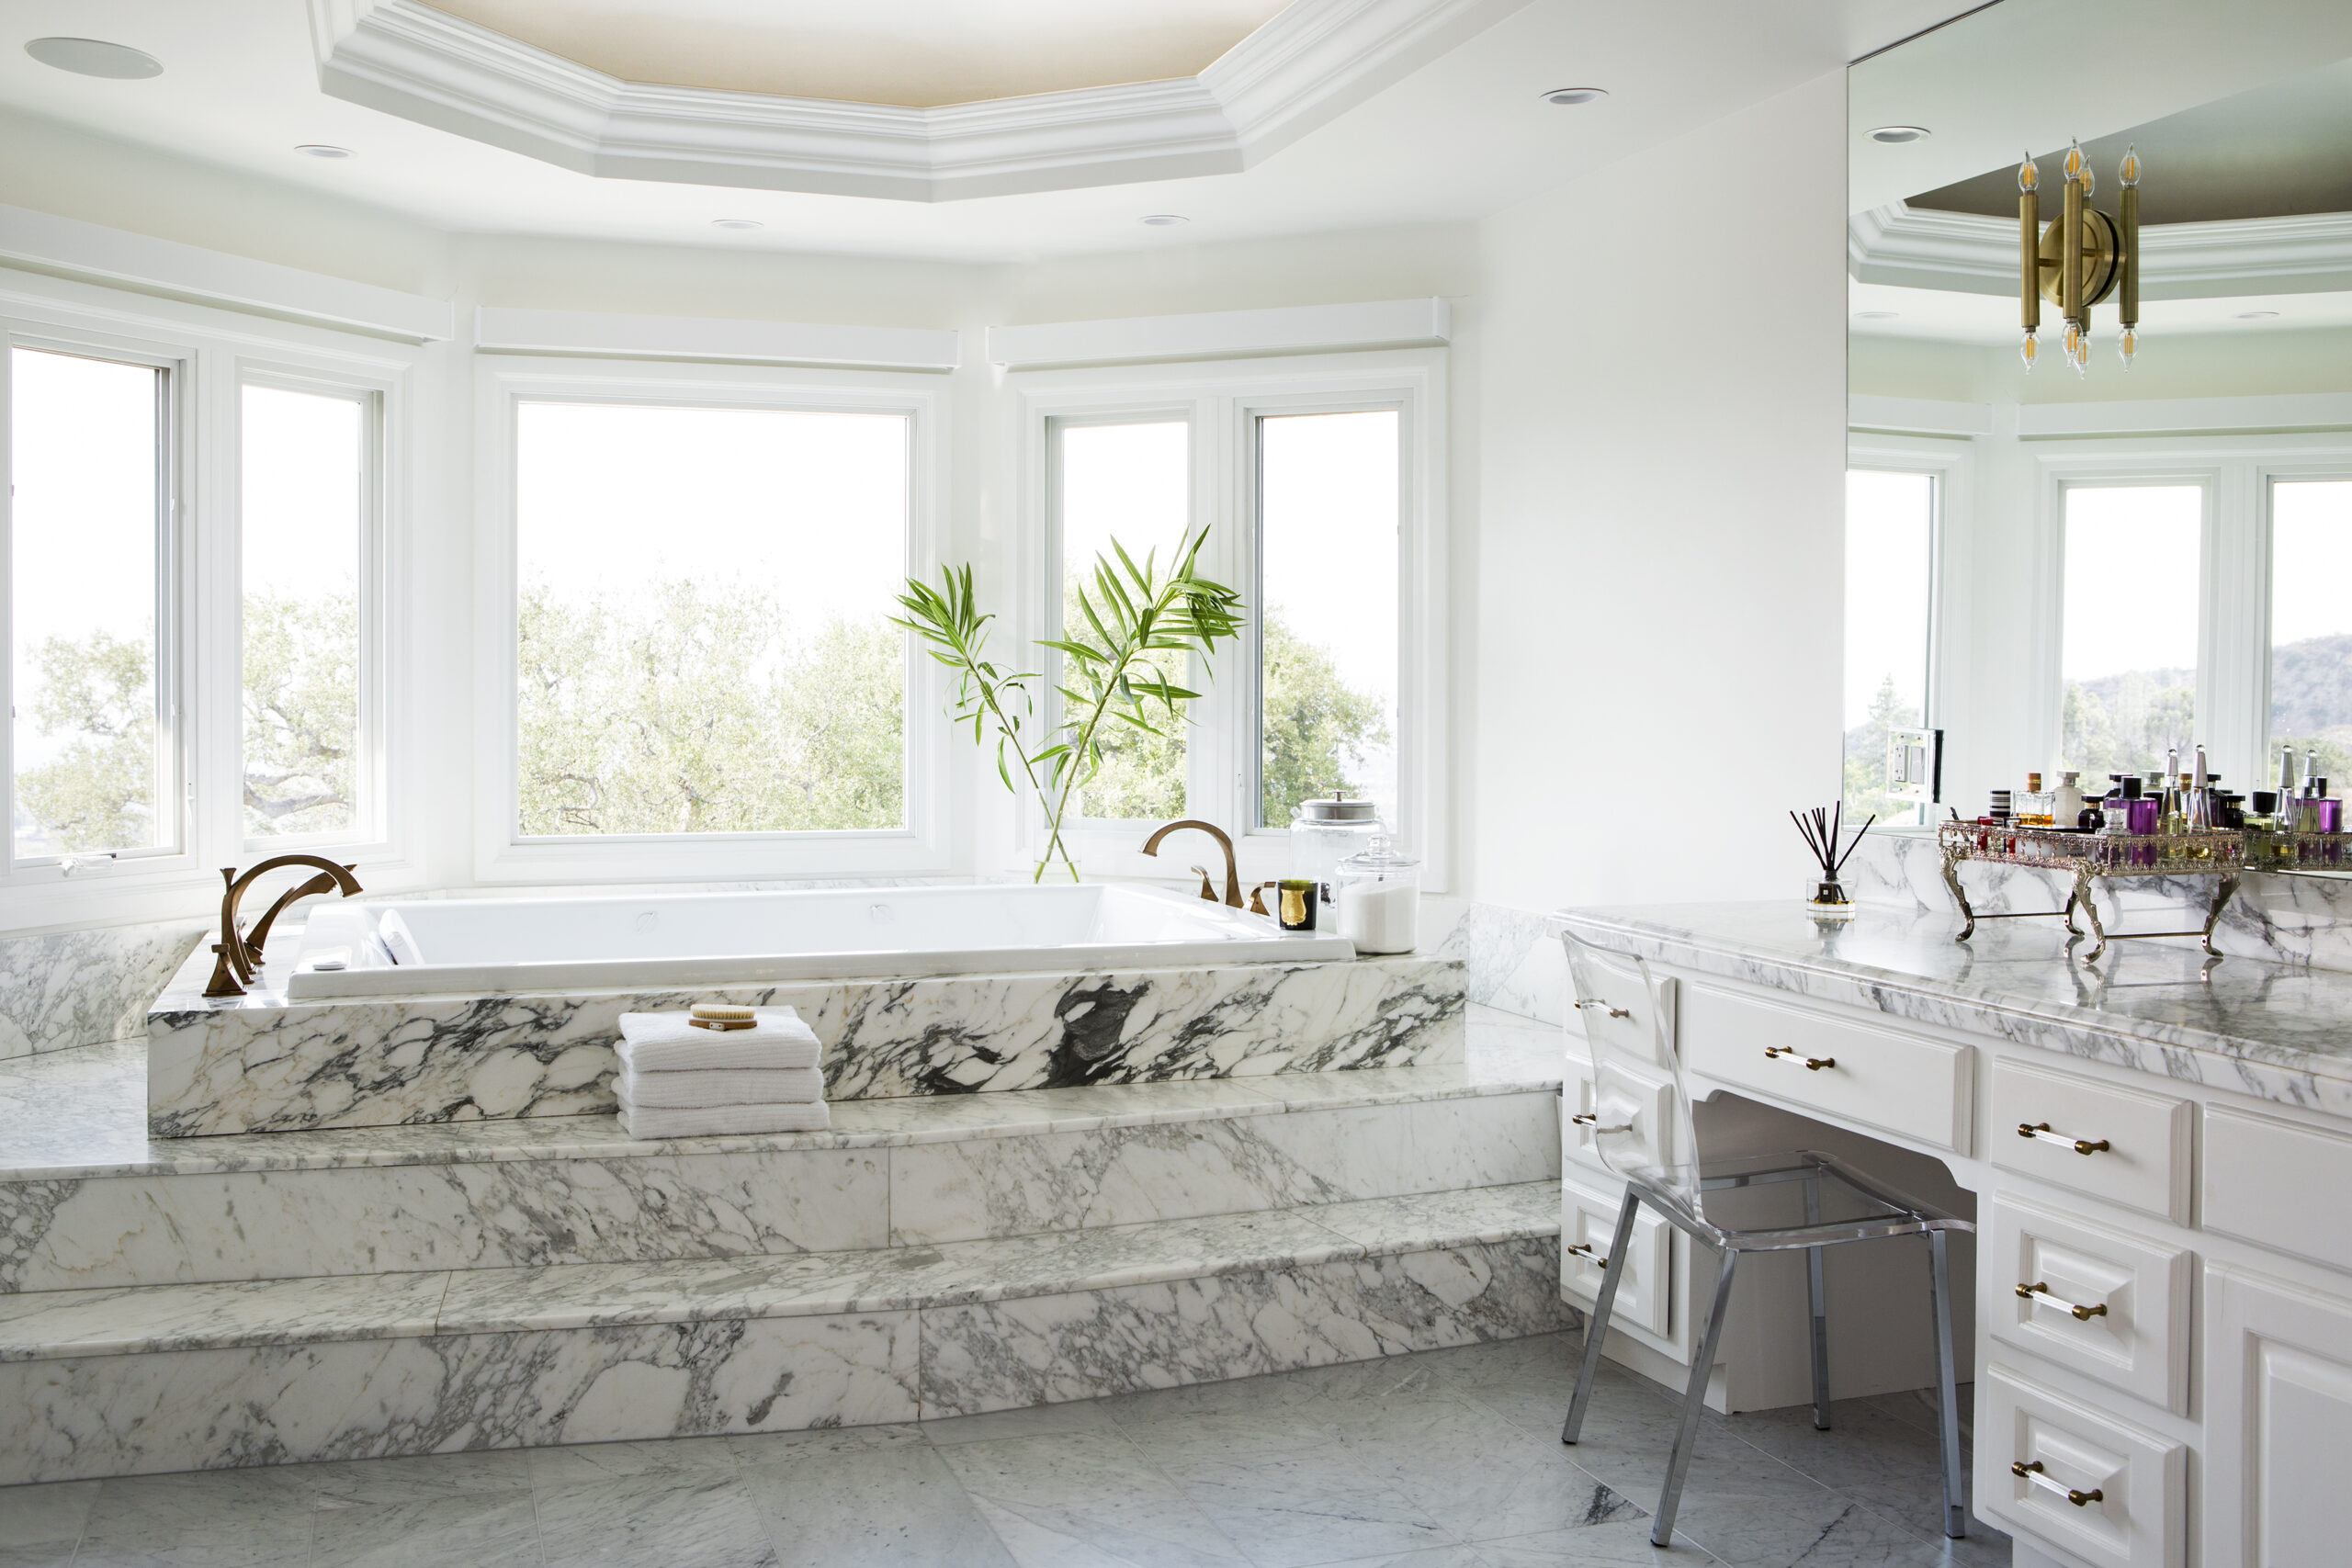 Add Home Equity and Bathroom Renovation Tips and Inspiration